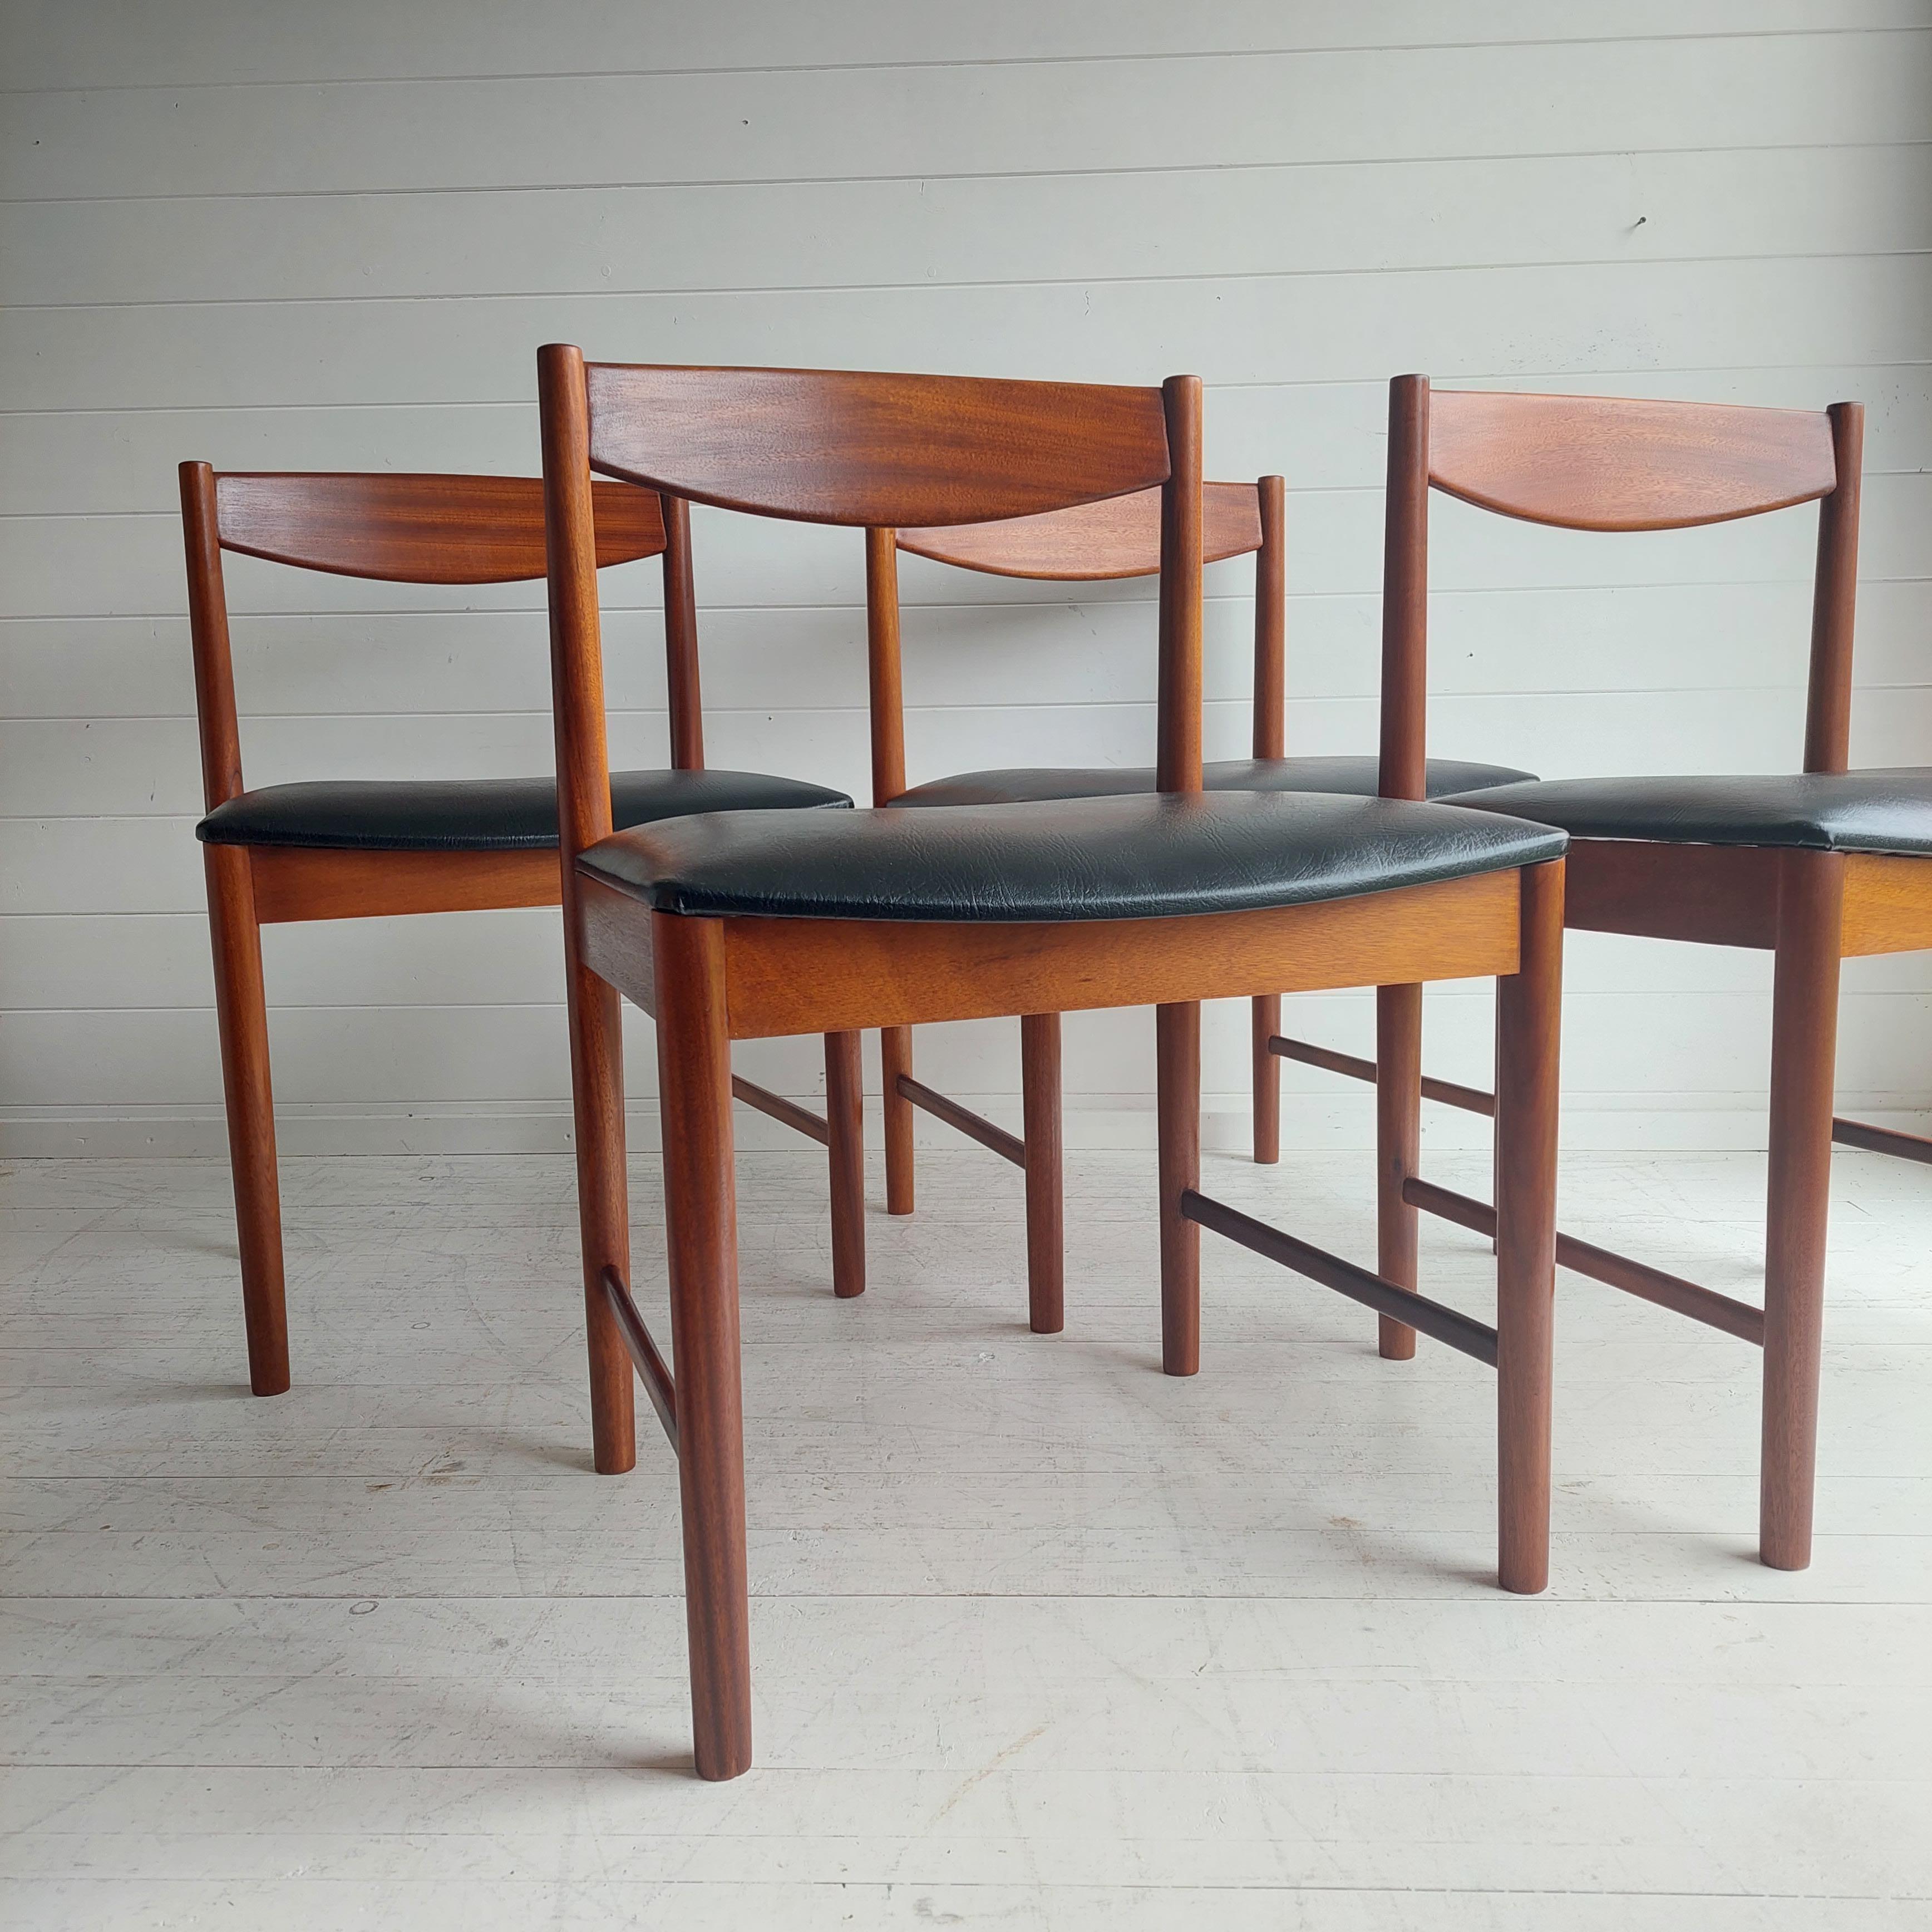 A fantastic set of four dining chairs designed by Tom Robertson in the 1970's for A.H McIntosh.
A set of four midcentury dining chairs by McIntosh made in teak with newly upholstered black vinyl seats.

The dining chairs are a simple midcentury